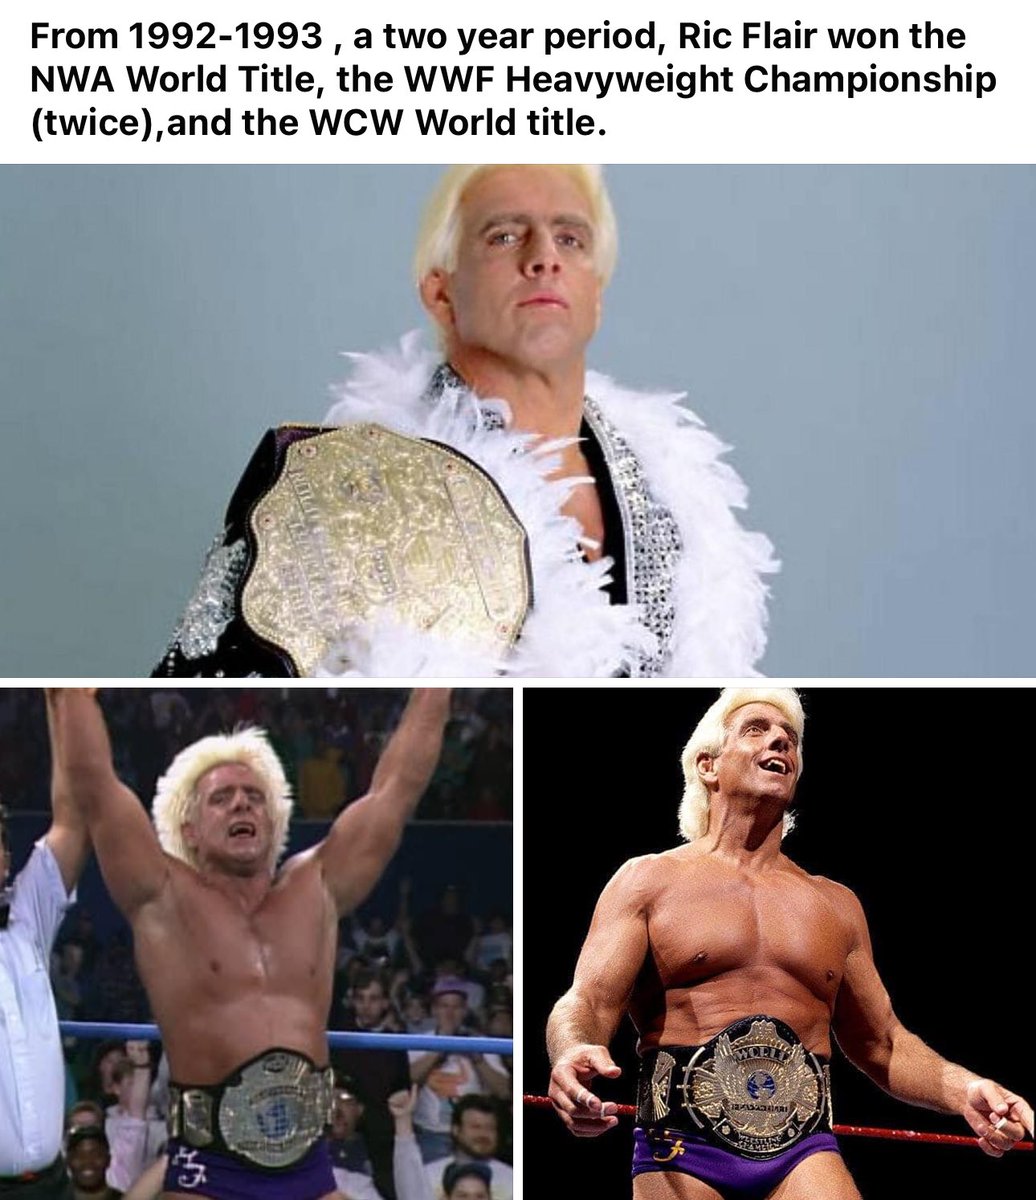 Interesting fact about @RicFlairNatrBoy 
Something we’ll probably never see again. Closest thing will be @AJStylesOrg winning the @njpwworld and @WWE title in a 2 year span. #wrestling #WrestleMania #WWE